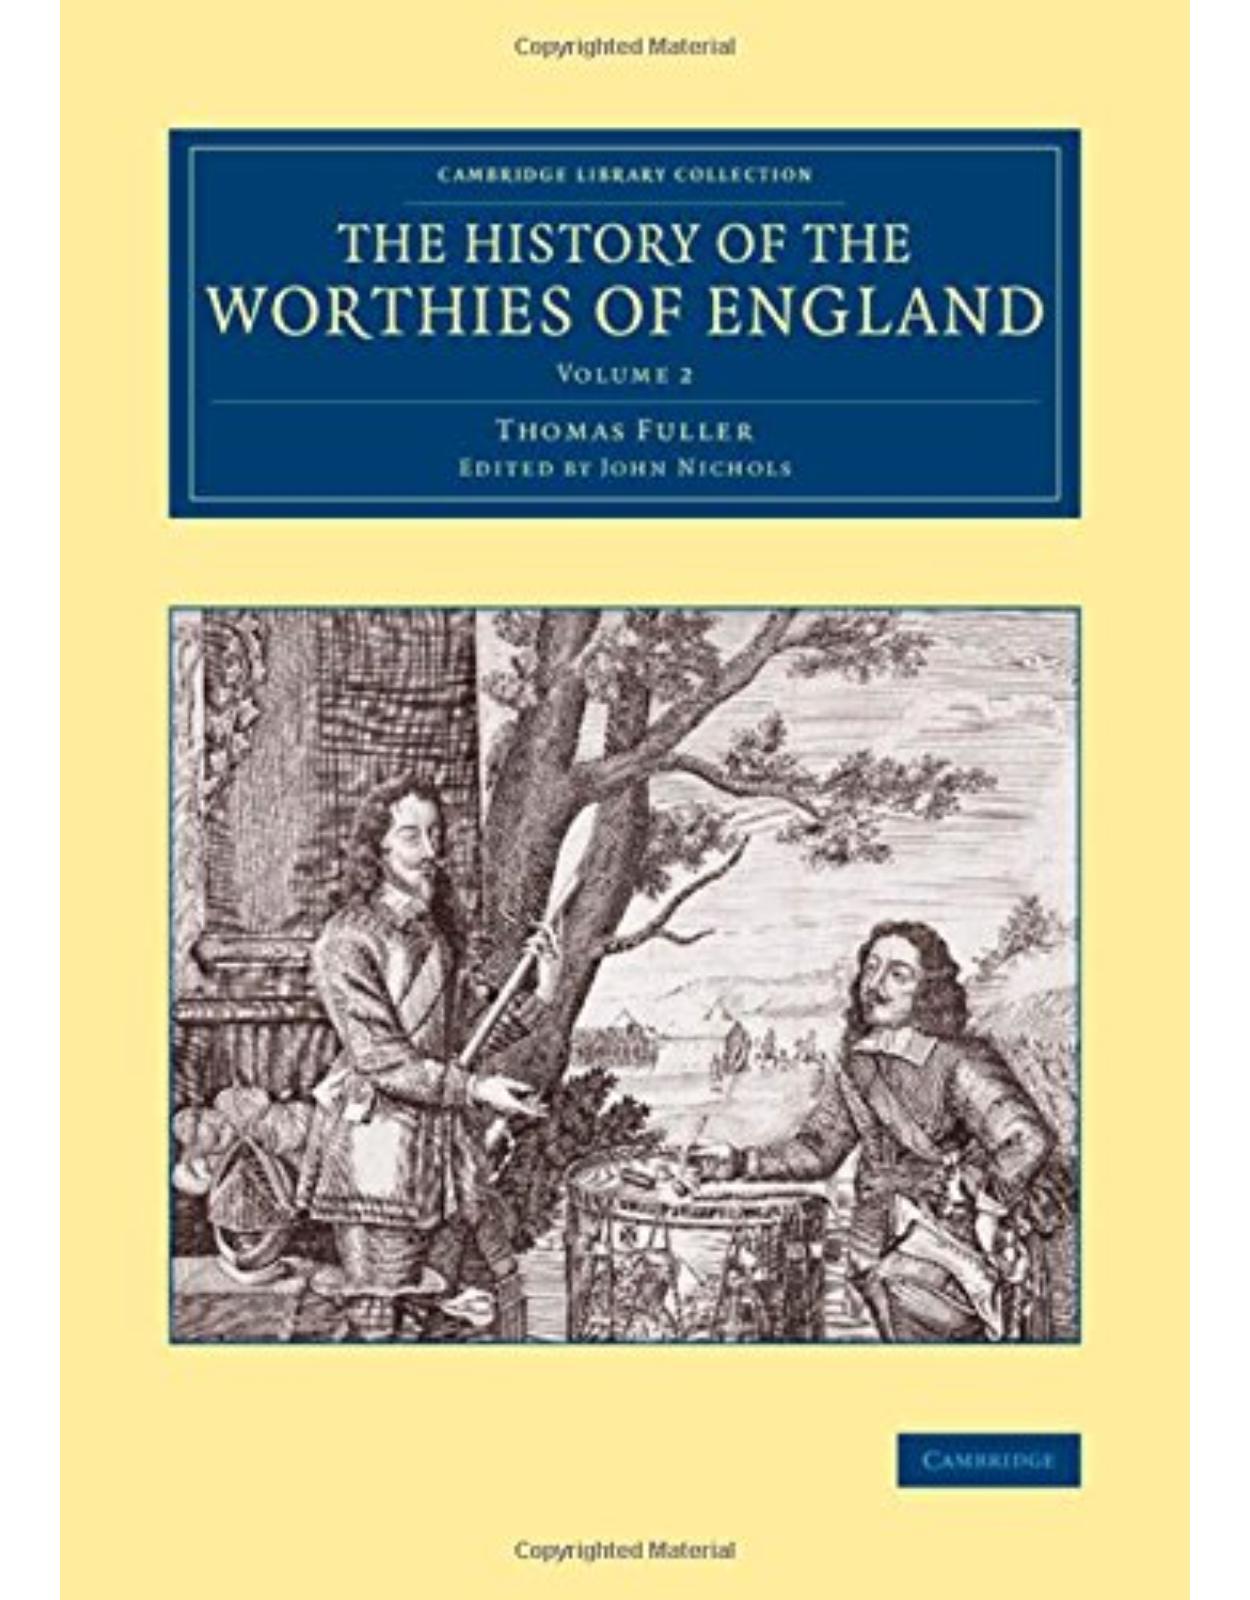 The History of the Worthies of England: Volume 2 (Cambridge Library Collection - British and Irish History, General)